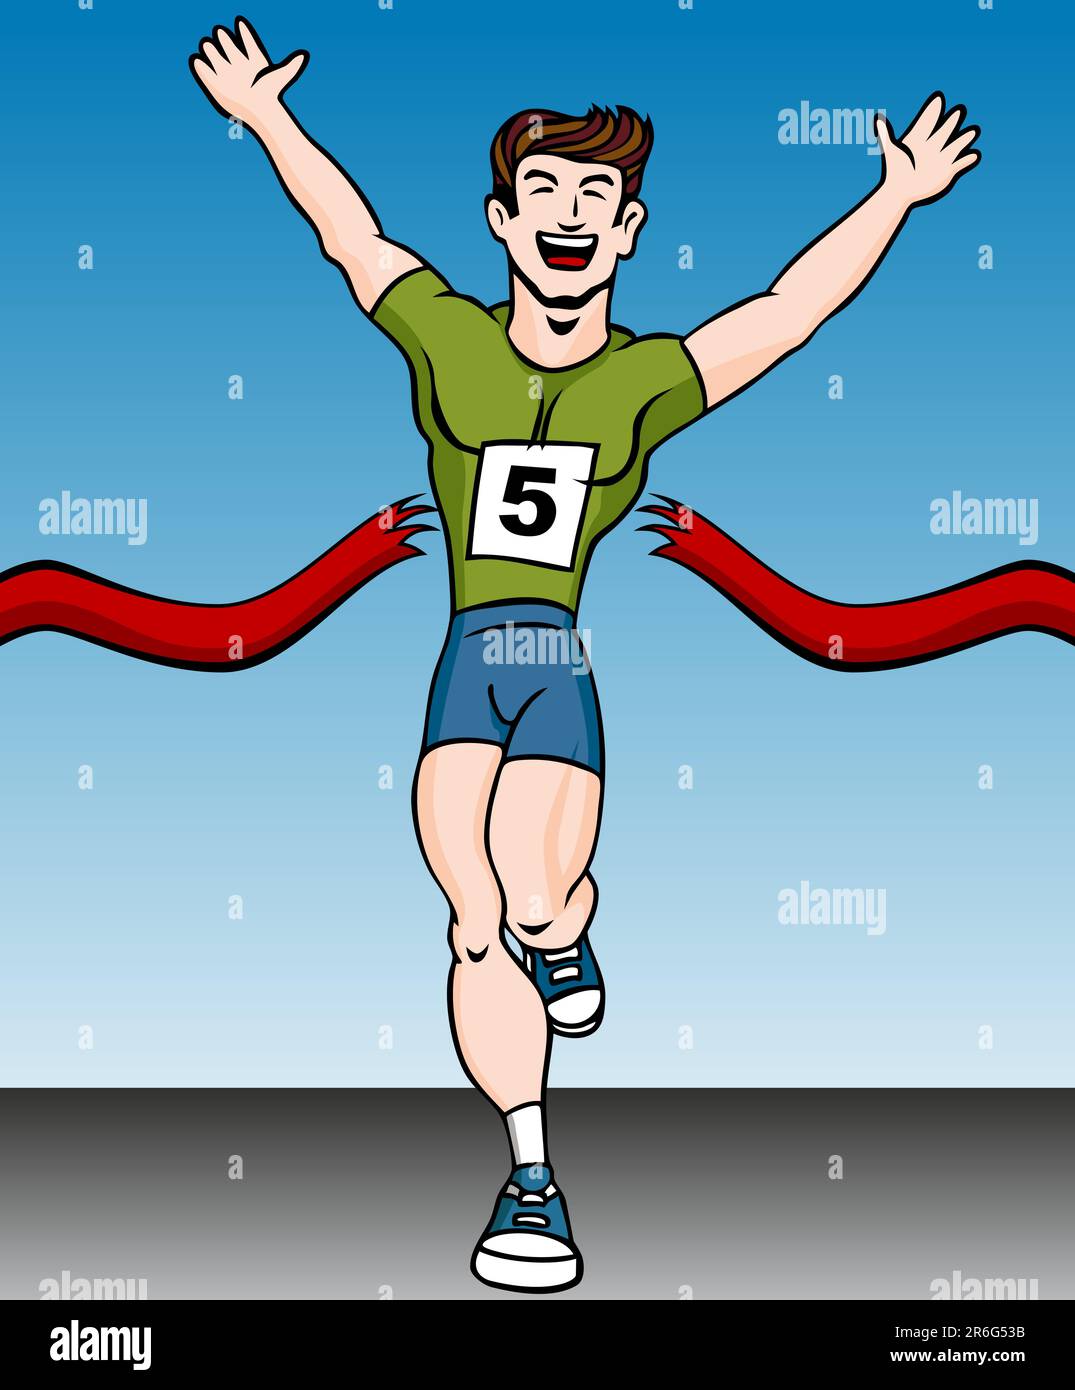 Cartoon of a man reaching the finish line in a running event. Stock Vector